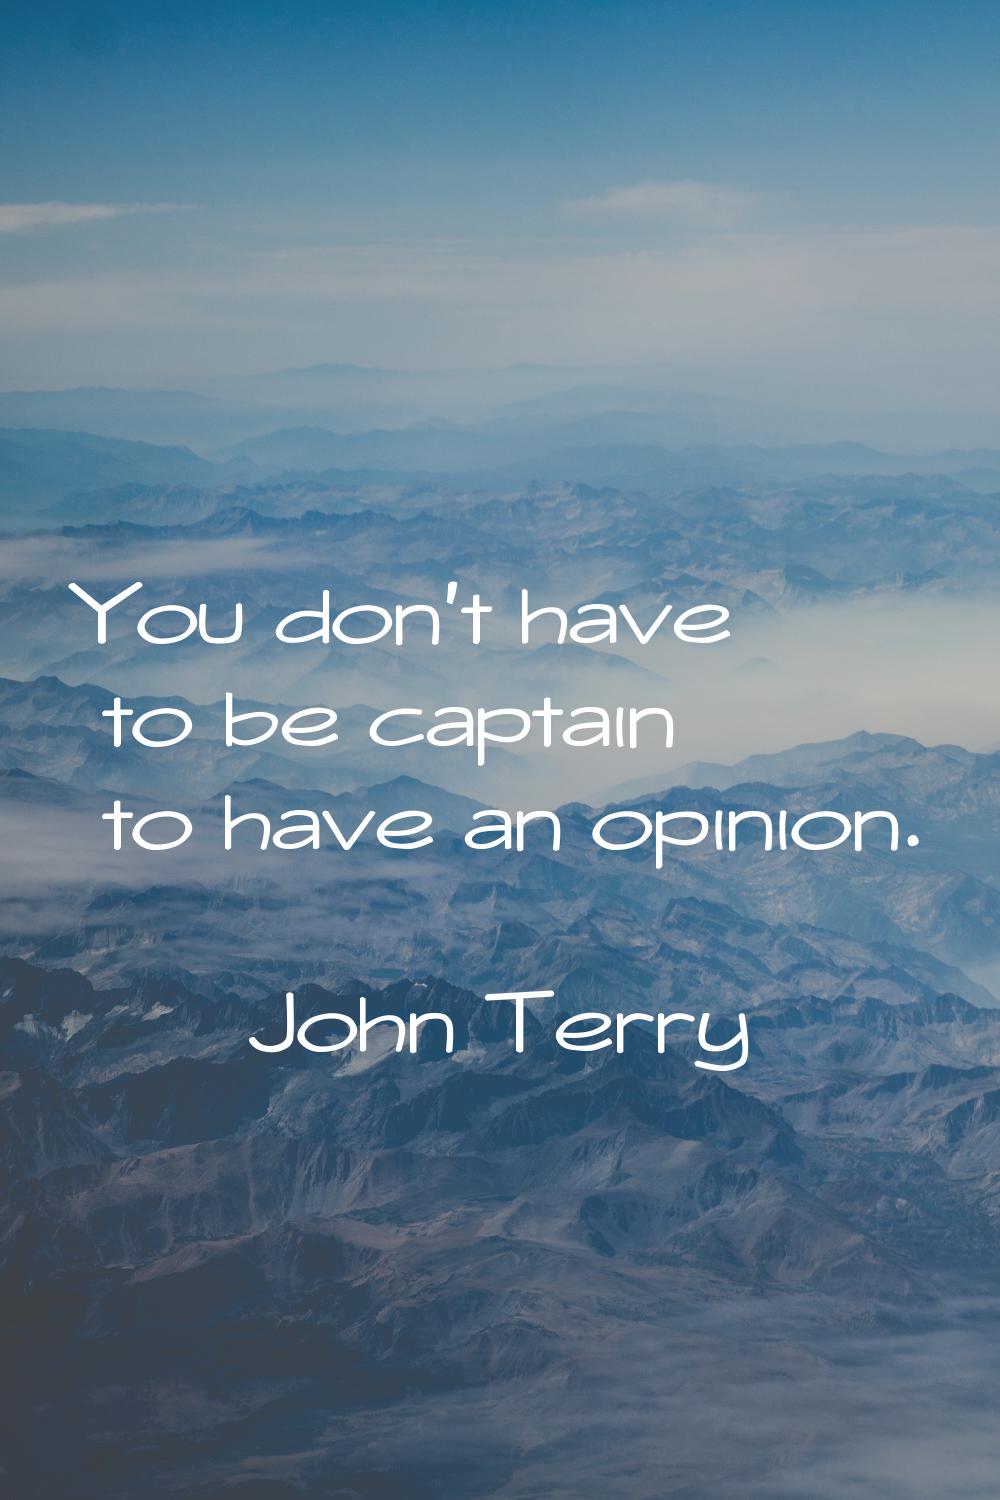 You don't have to be captain to have an opinion.